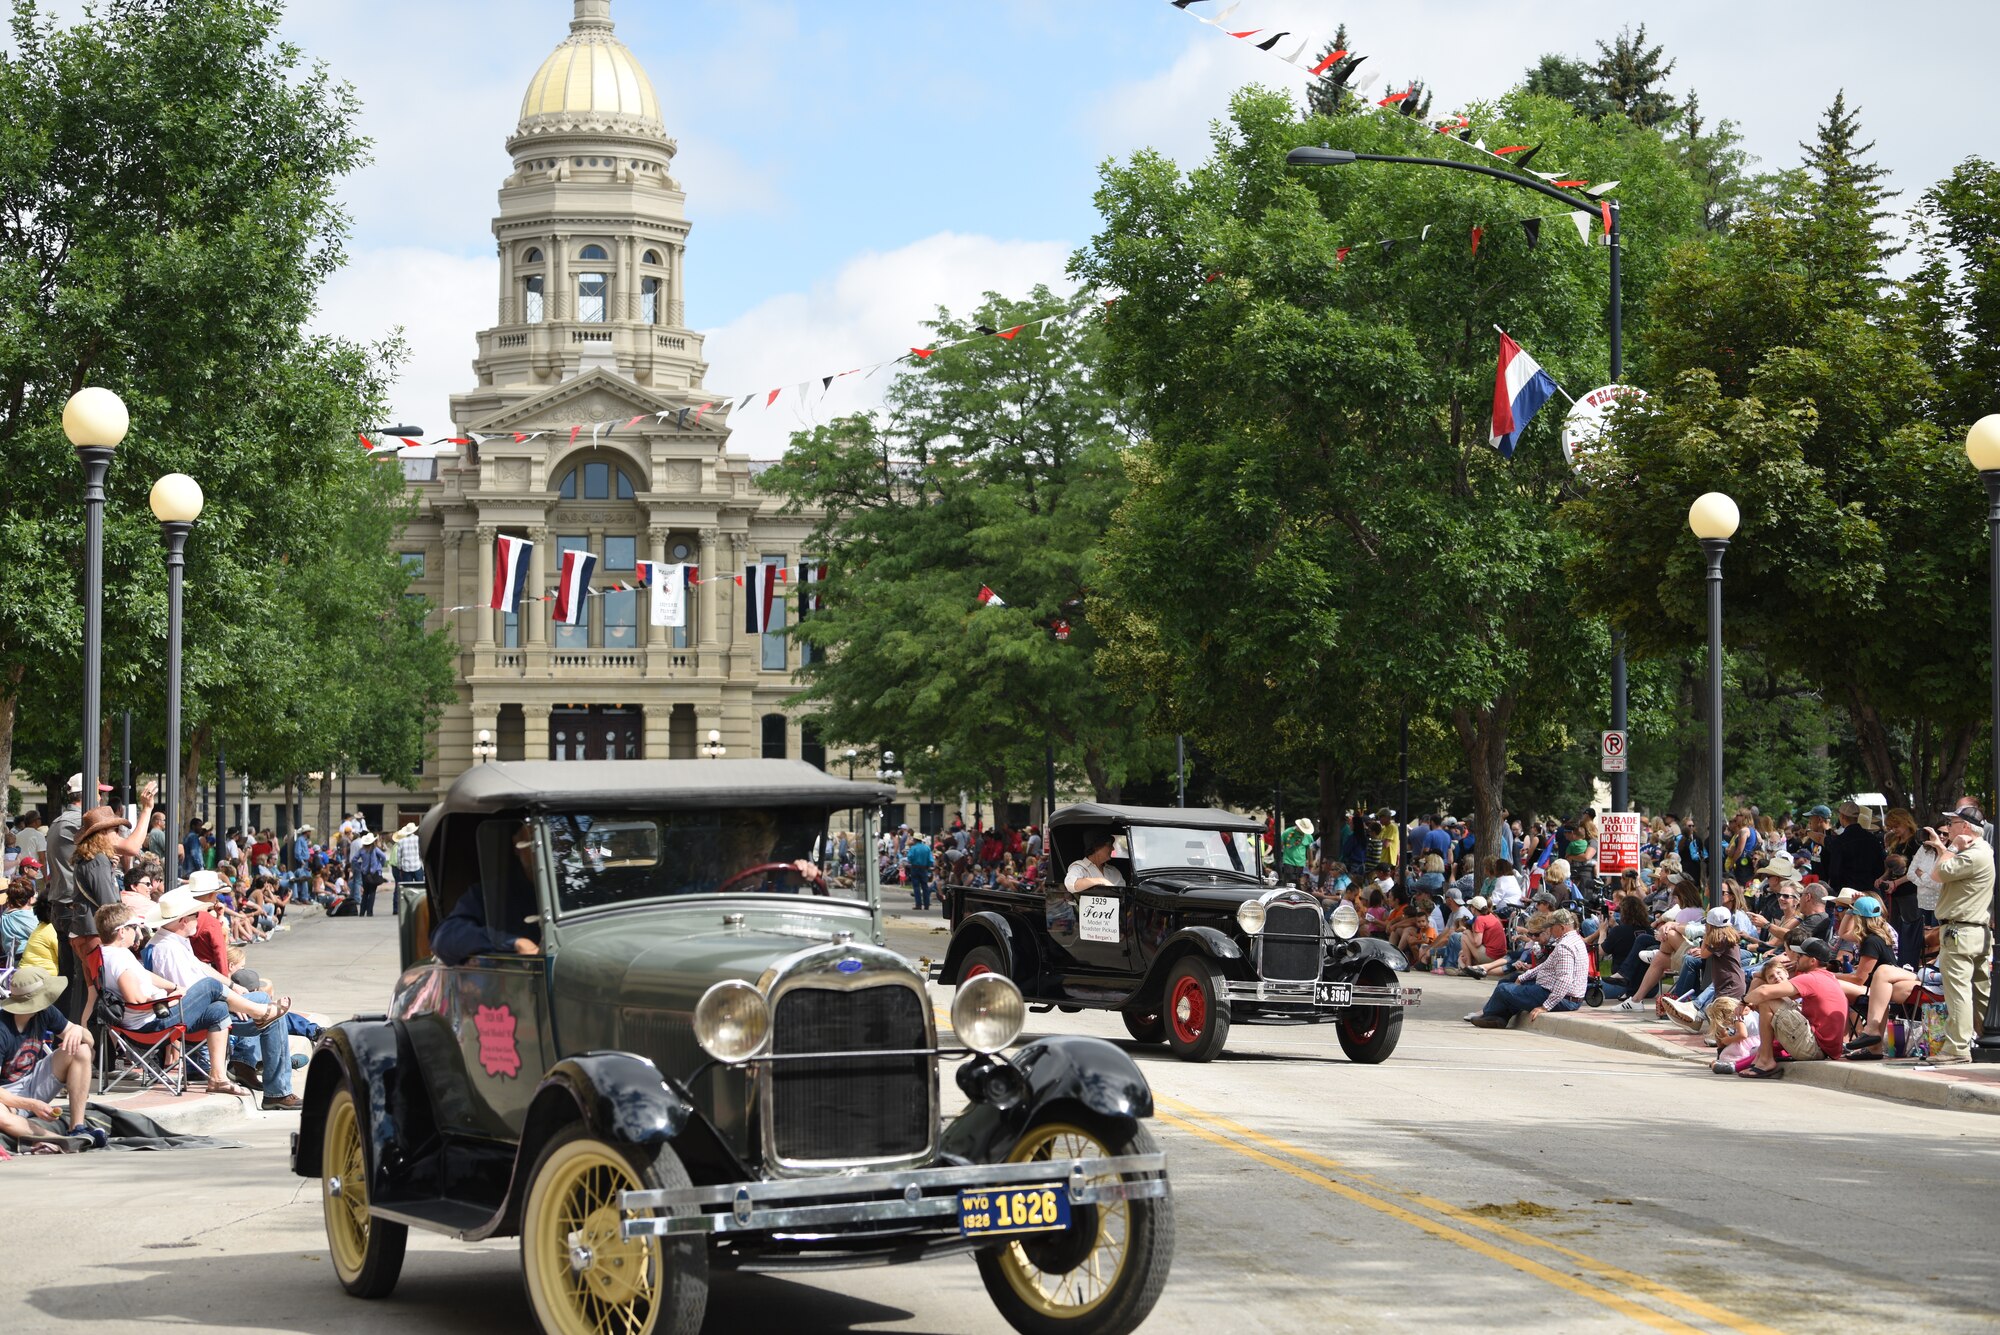 Parade participants drive historic cars during the Grand Parade in Cheyenne, Wyo., July 20, 2019. The Cheyenne community and F.E. Warren Air Force Base have been working together for 123 years to keep the Daddy of ‘em all running smoothly. (U.S. Air Force photo by Staff Sgt. Ashley N. Sokolov)